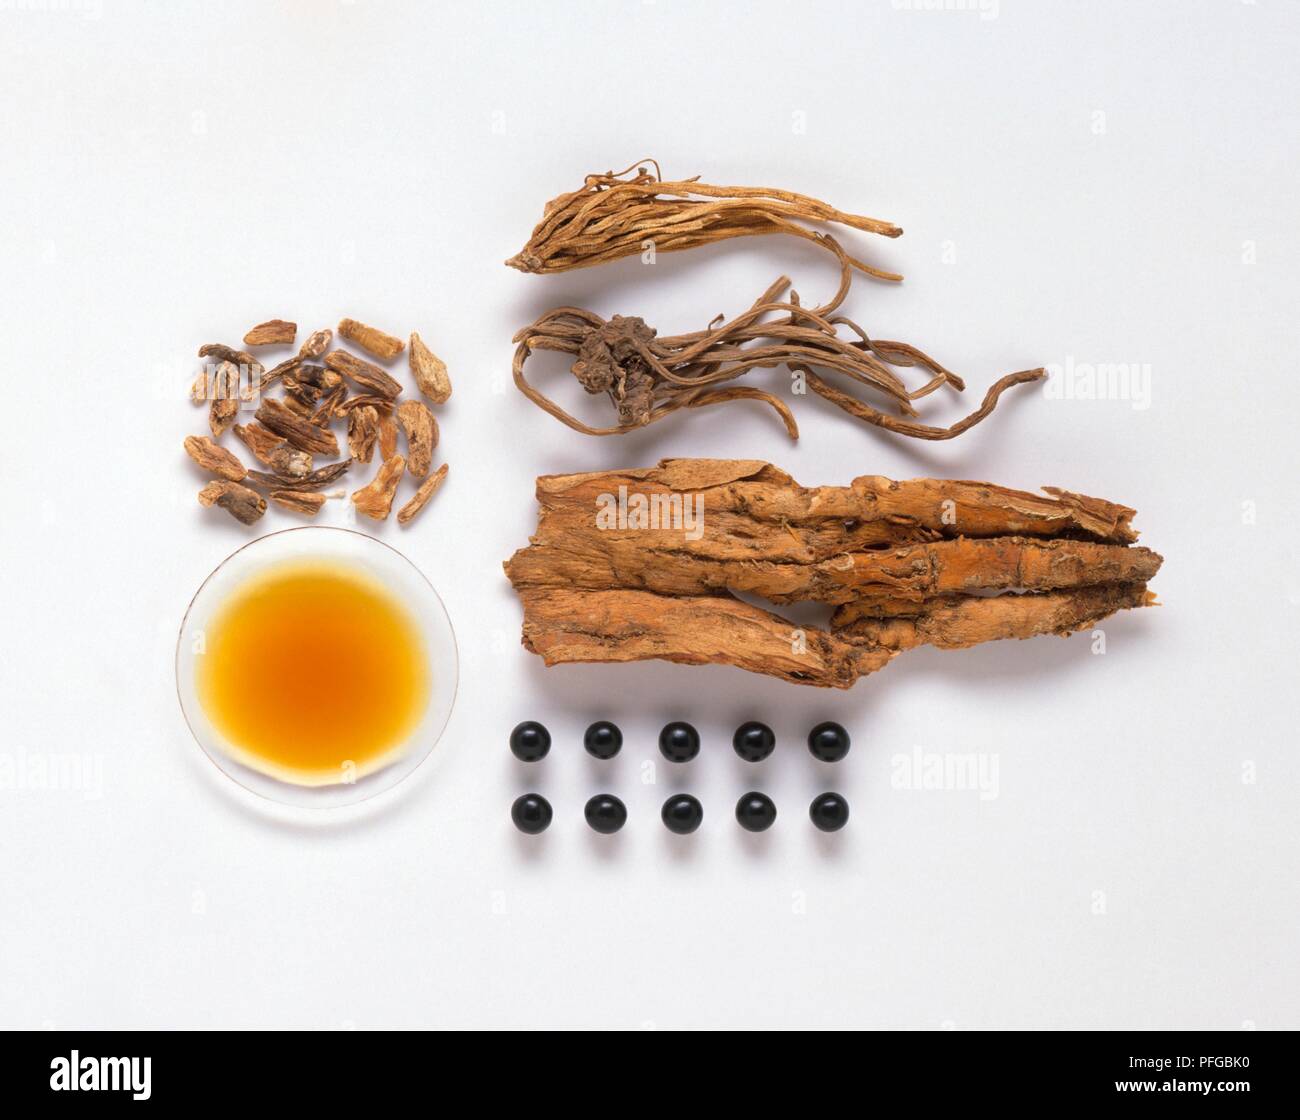 Dried root and tincture from Gentiana lutea, roots from Gentiana macrophylla (Qin jiao), root from Gentiana scabra (Long dan cao), and pills (Long dan xie gan wan) Stock Photo